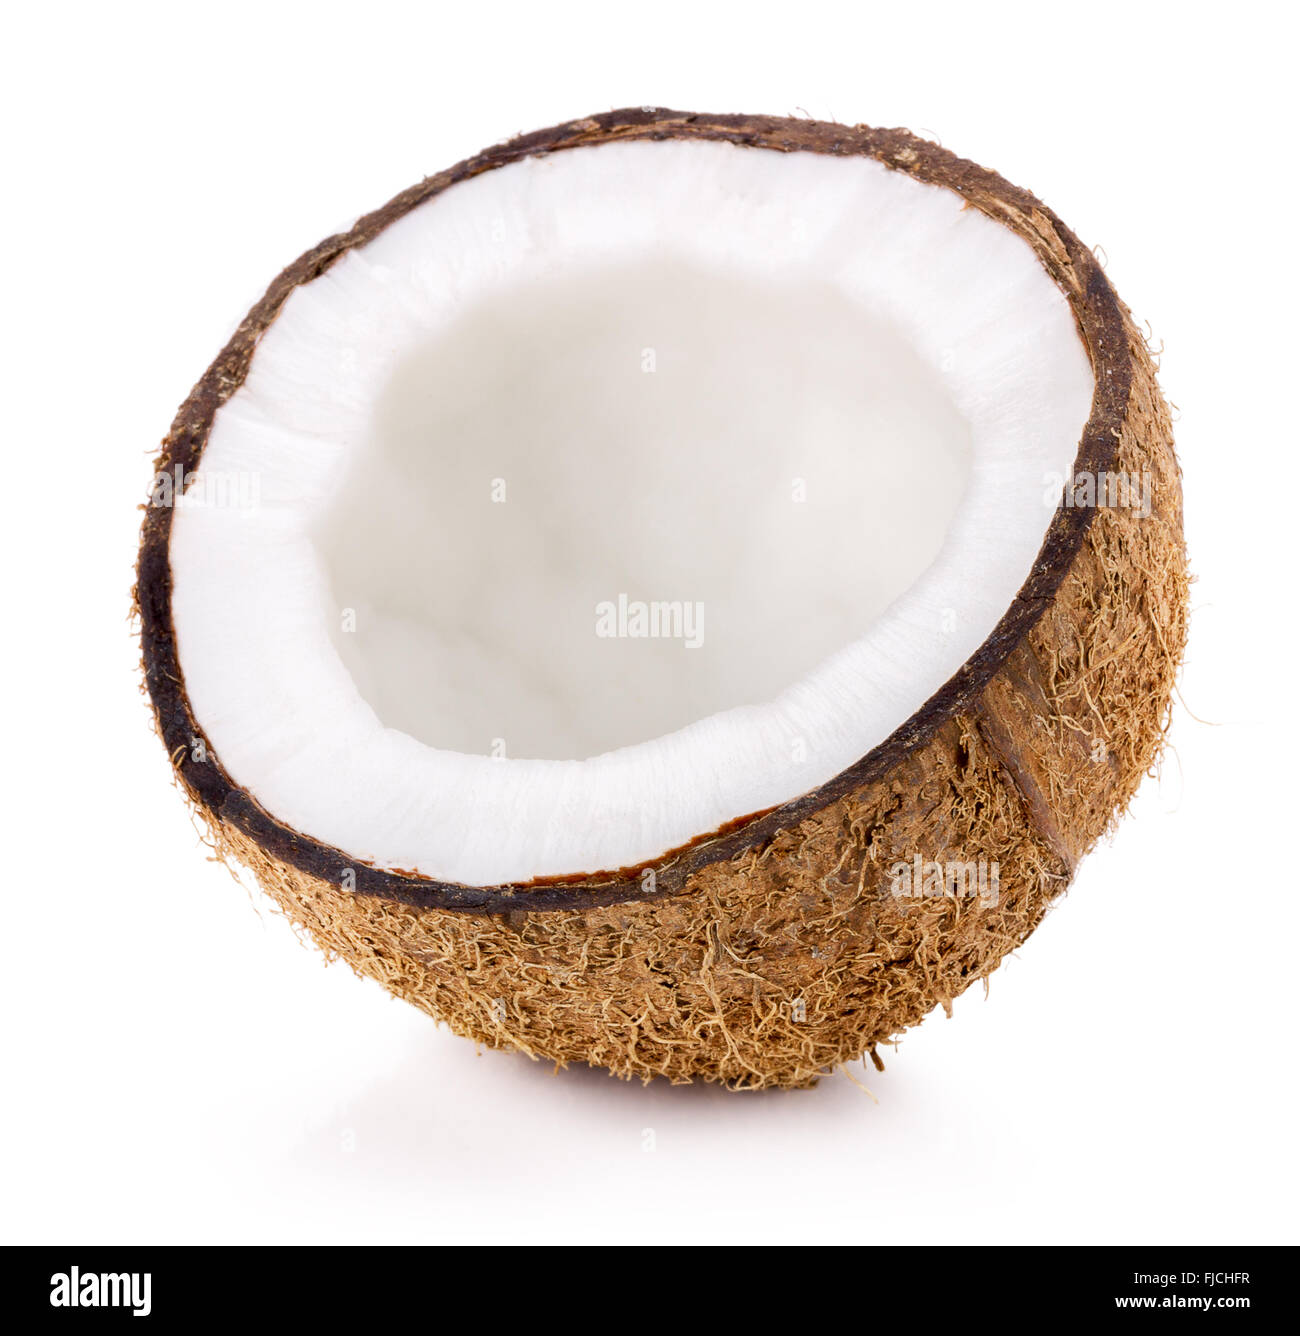 coconut isolated on the white background. Stock Photo